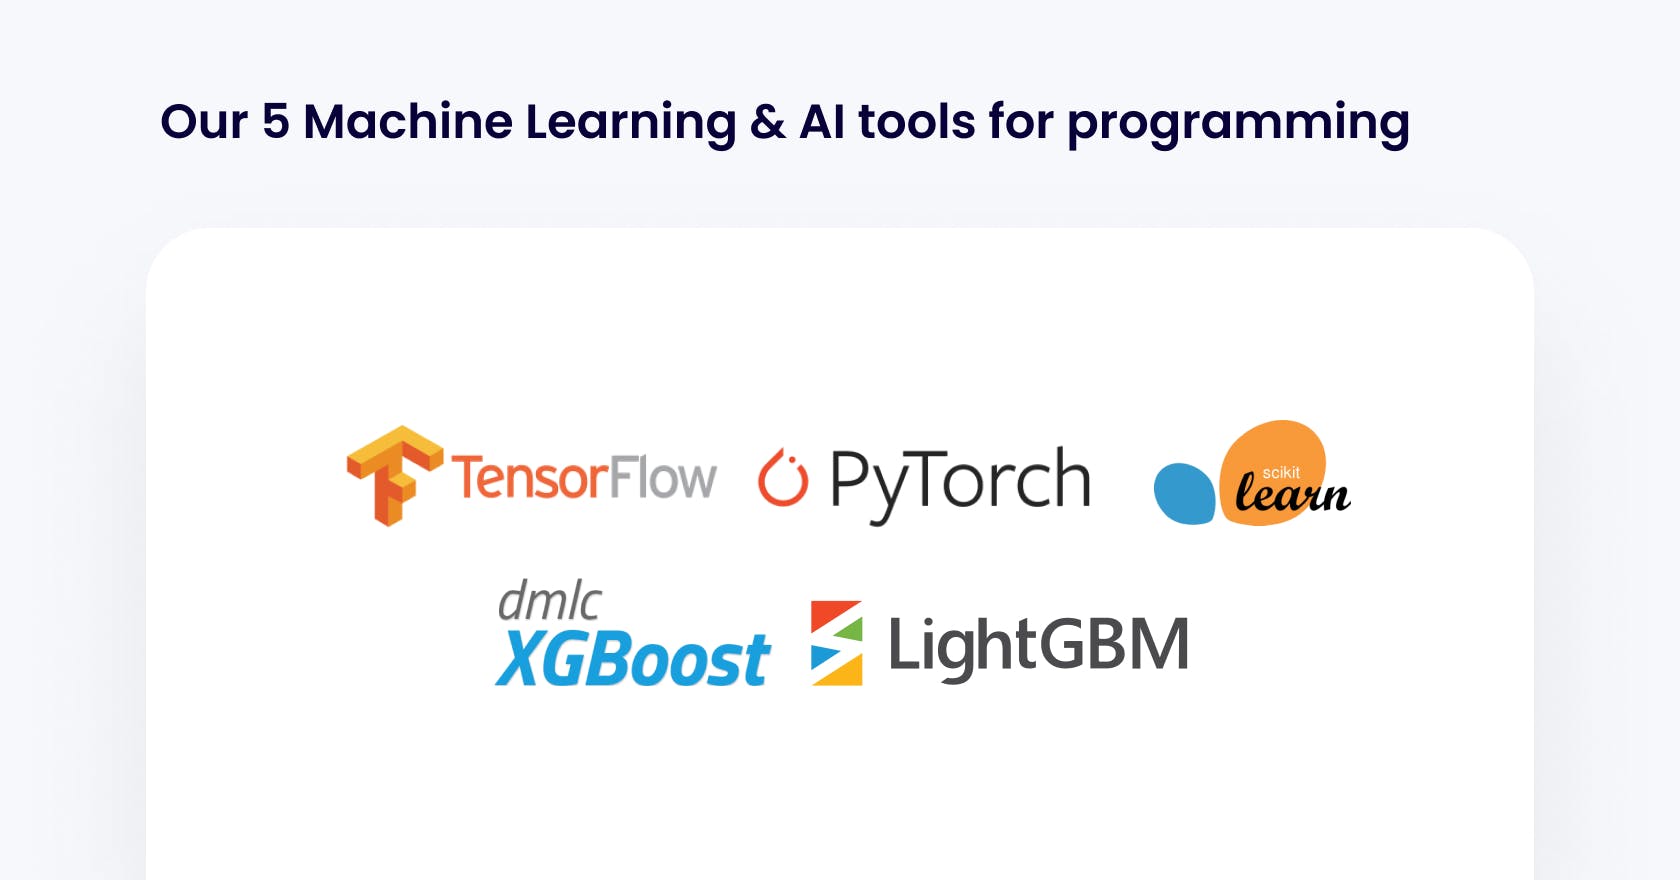 Nightborn - 5 Machine Learning and AI tools for programming